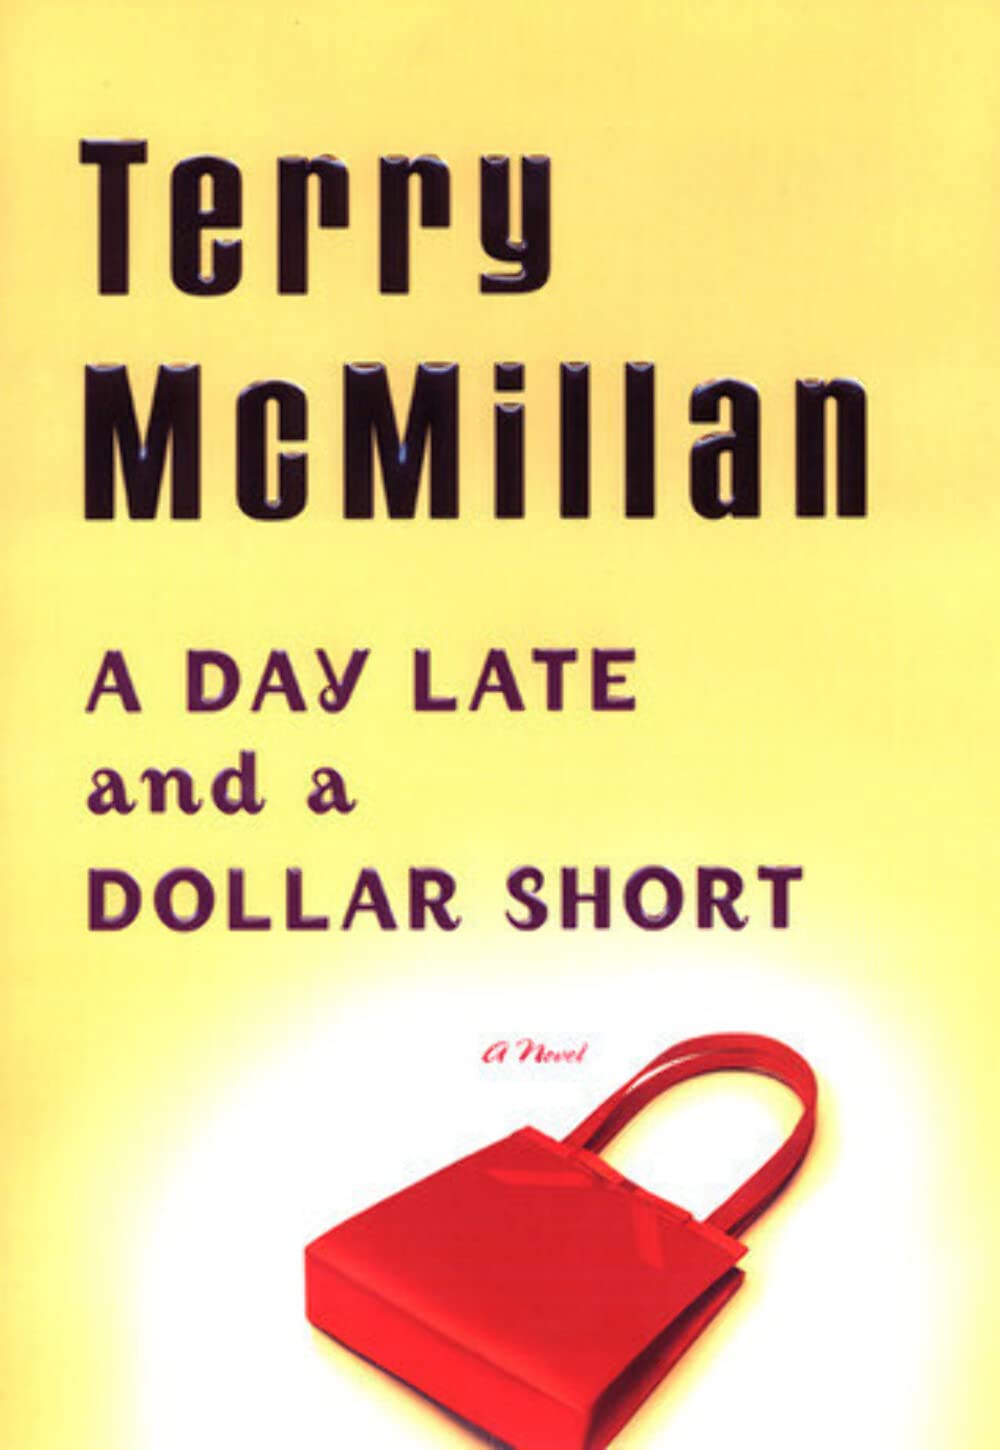 A Day Late and a Dollar Short by Terry McMillan